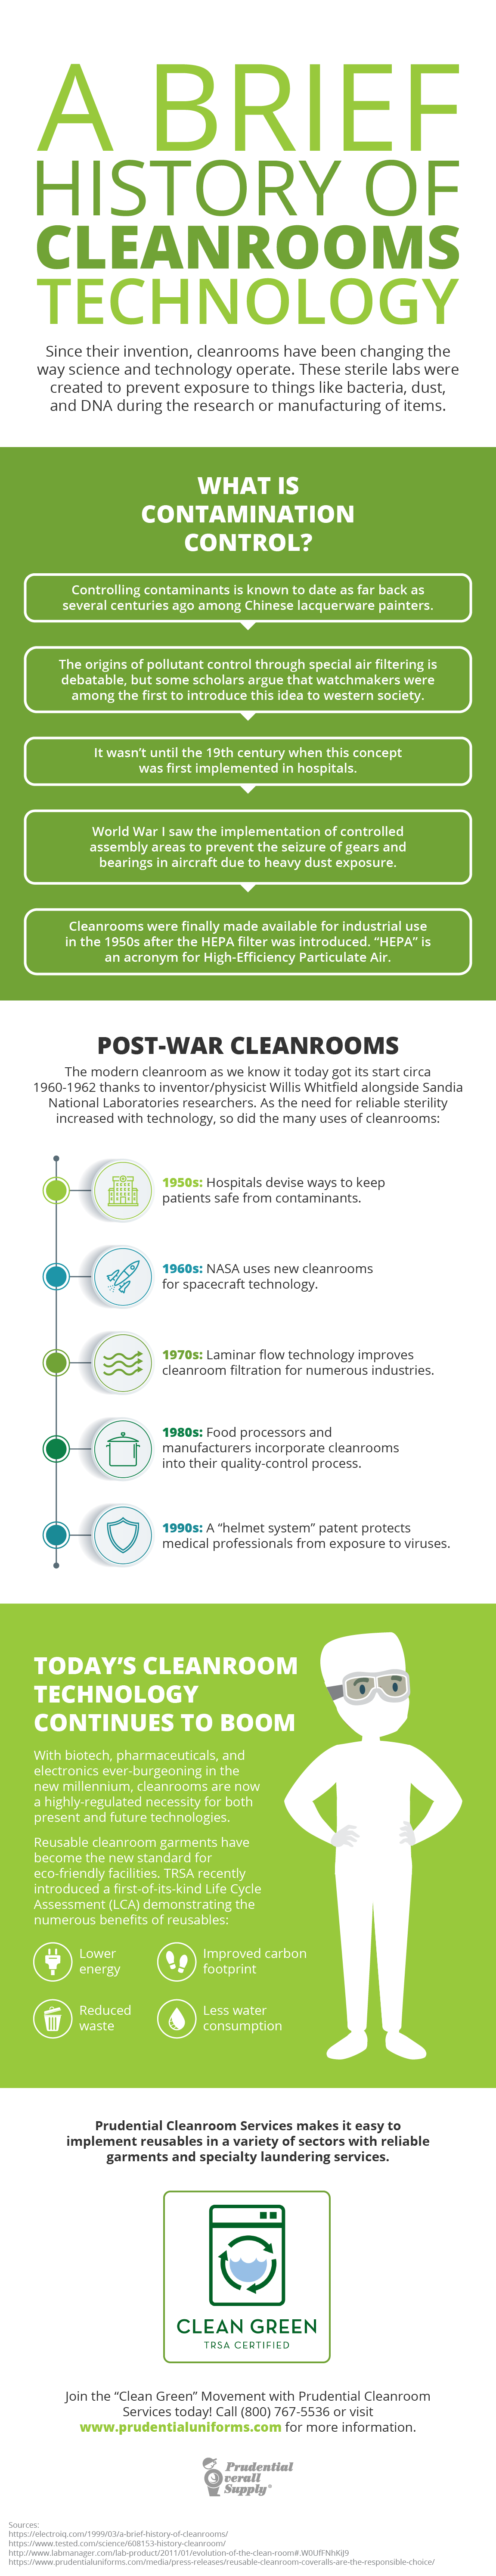 History of Cleanroom Infographic